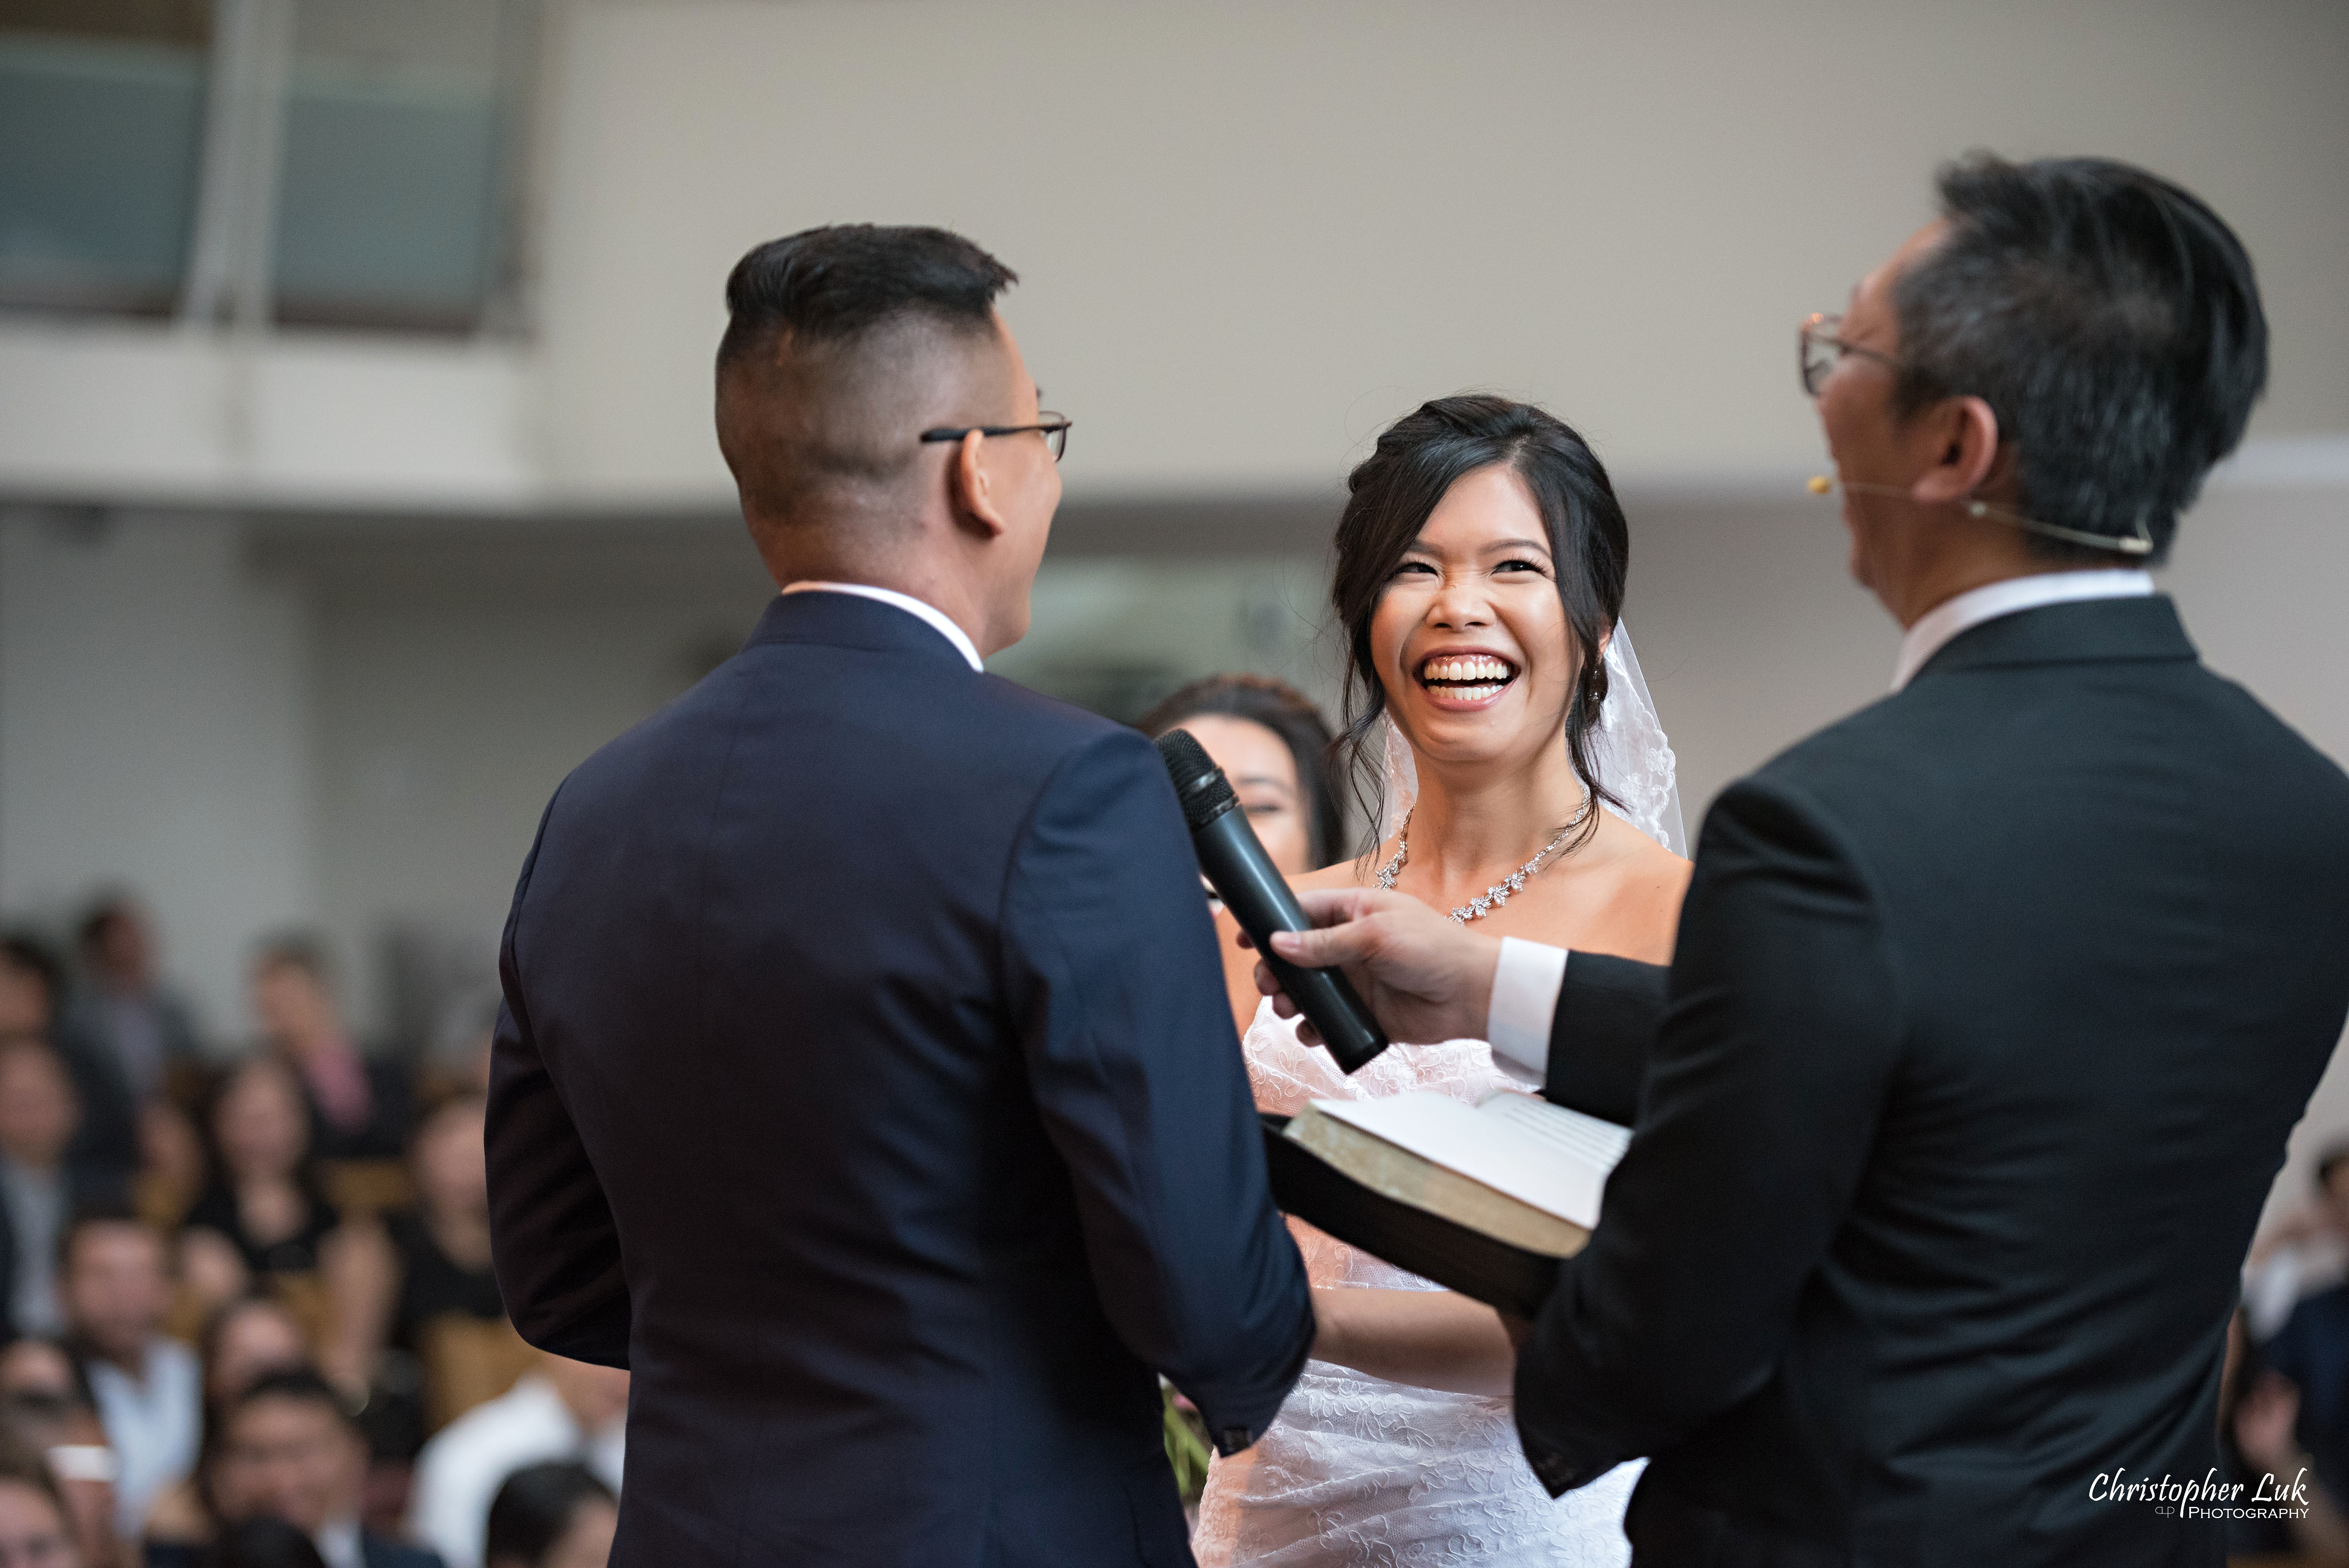 Christopher Luk - Toronto Wedding Photographer - Markham Chinese Baptist Church MCBC Christian Ceremony - Natural Candid Photojournalistic Bride Groom Vows Laugh Funny